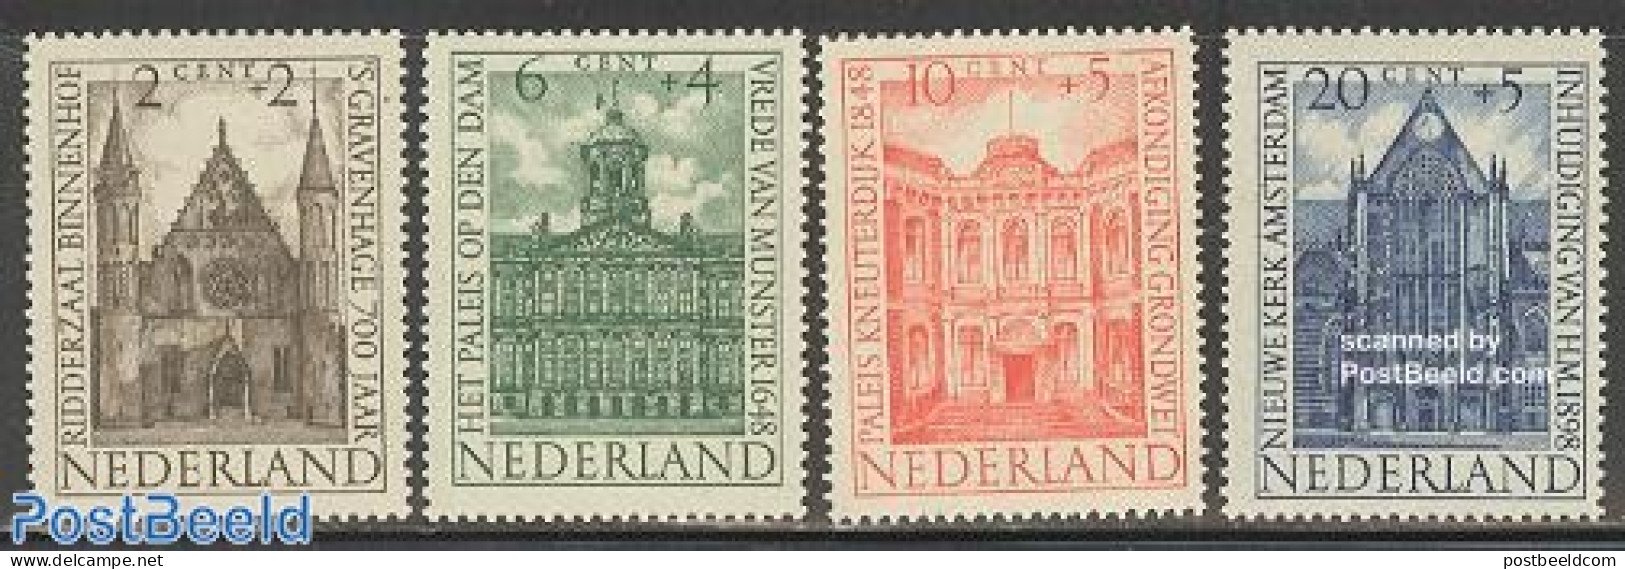 Netherlands 1948 Architectural Heritage 4v, Mint NH, Religion - Churches, Temples, Mosques, Synagogues - Art - Archite.. - Neufs